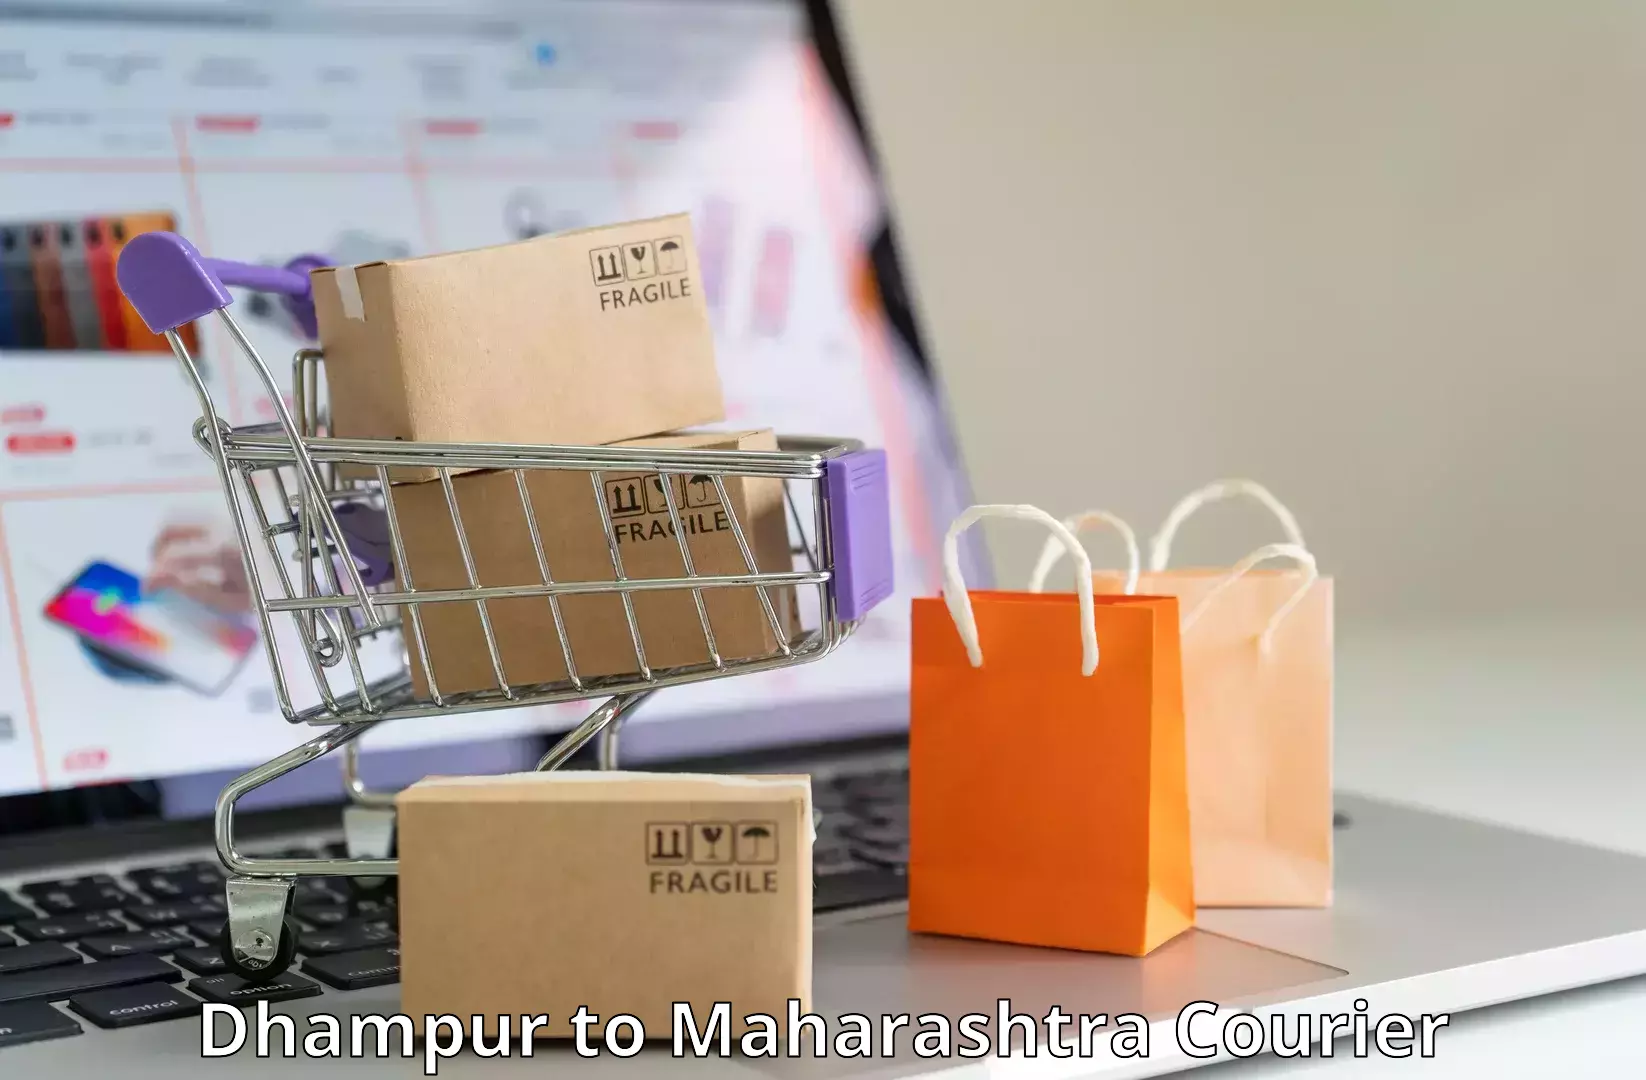 Courier service efficiency Dhampur to Raver